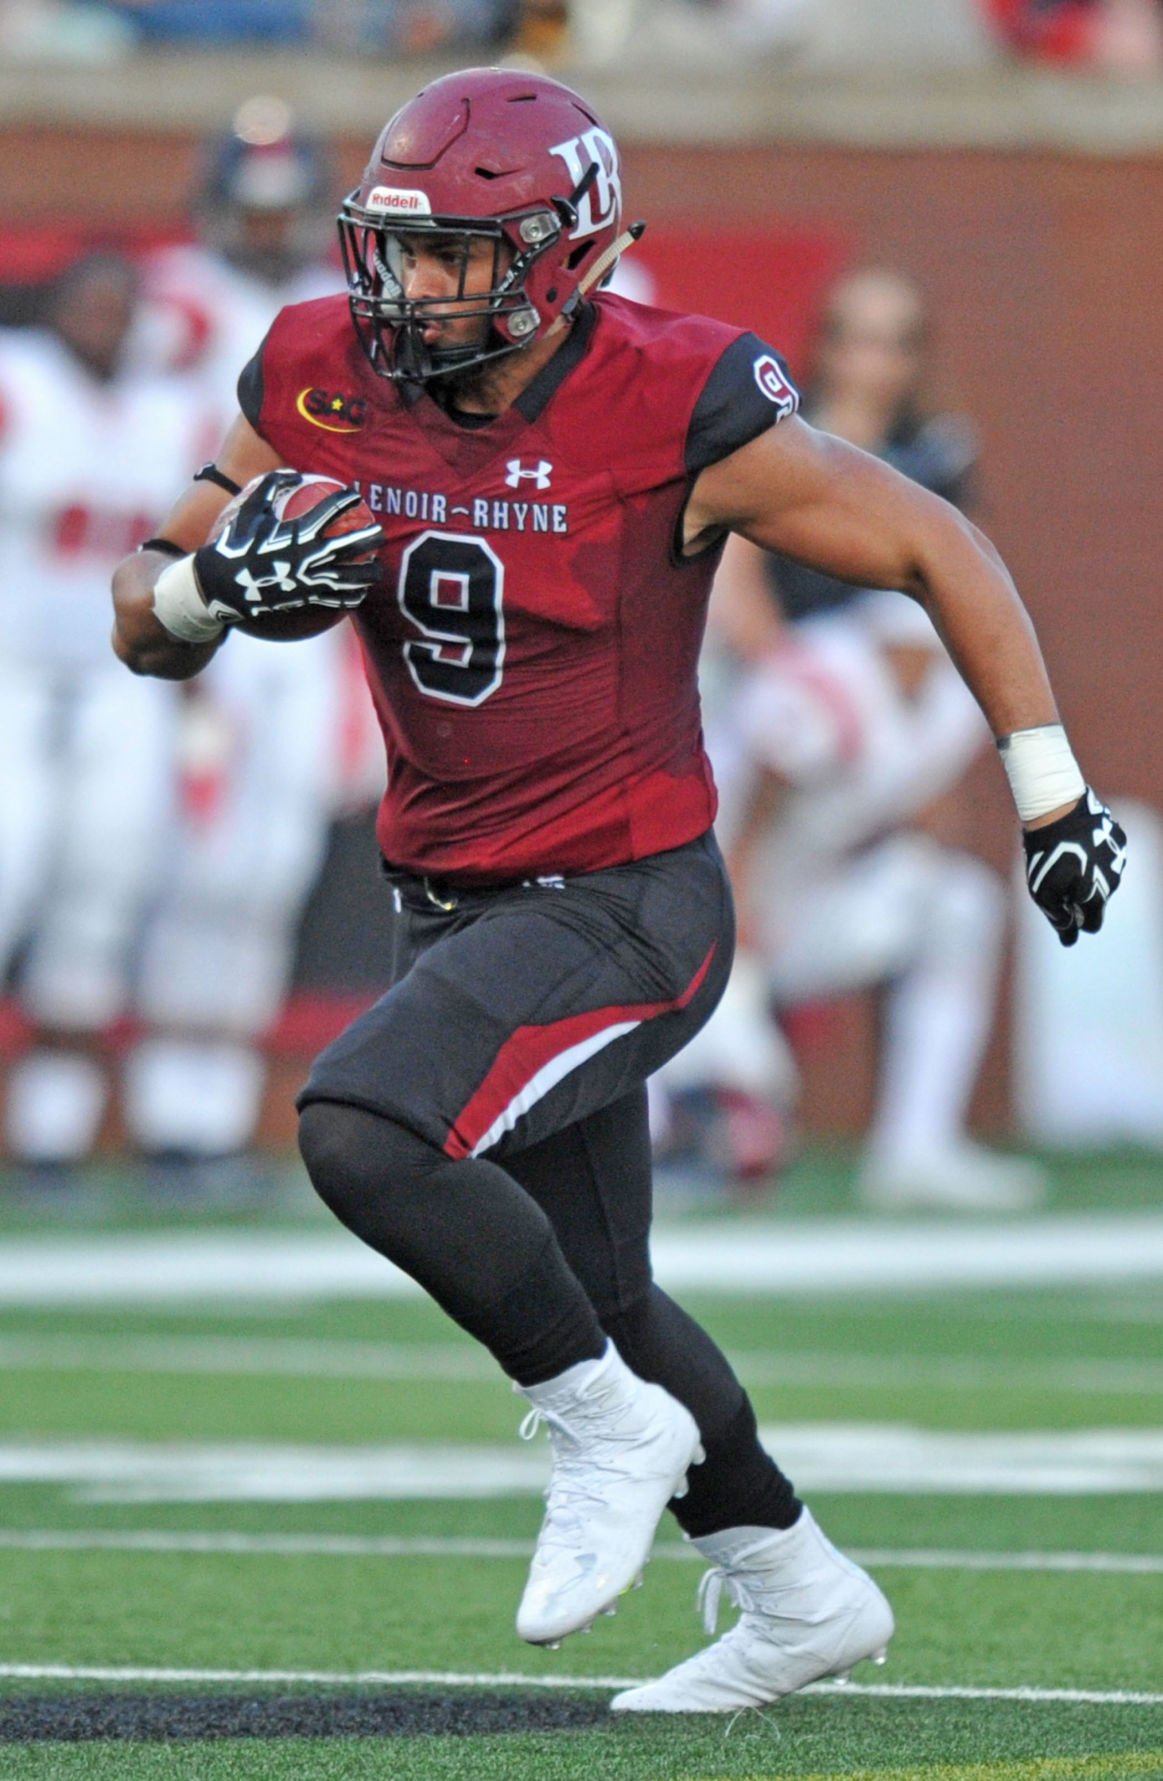 44 HQ Photos North Greenville University Football Roster / Greenville football team features an experienced roster ...